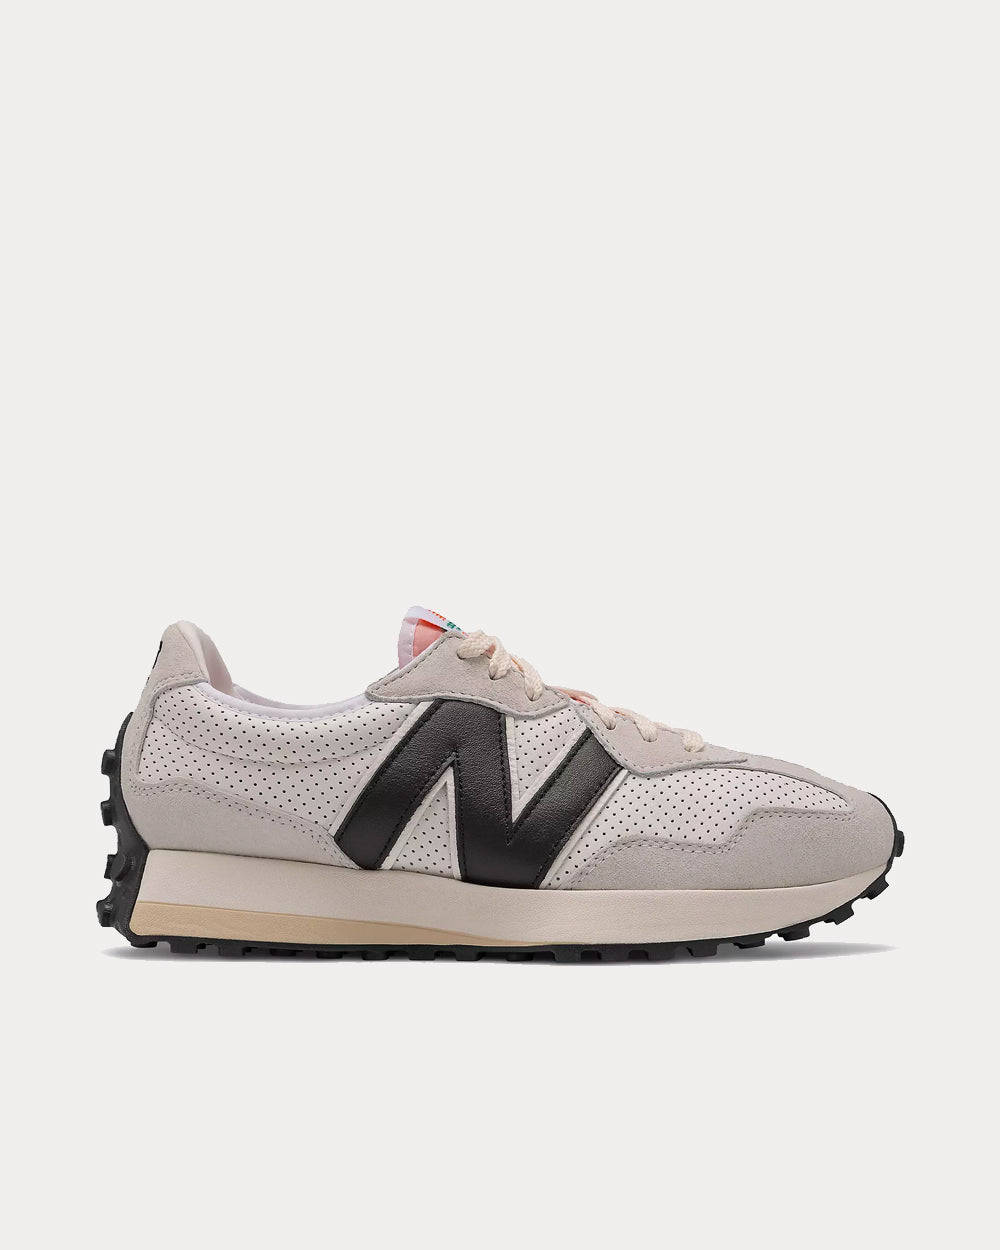 New Balance X Casablanca - 327 White with Black Low Top Sneakers